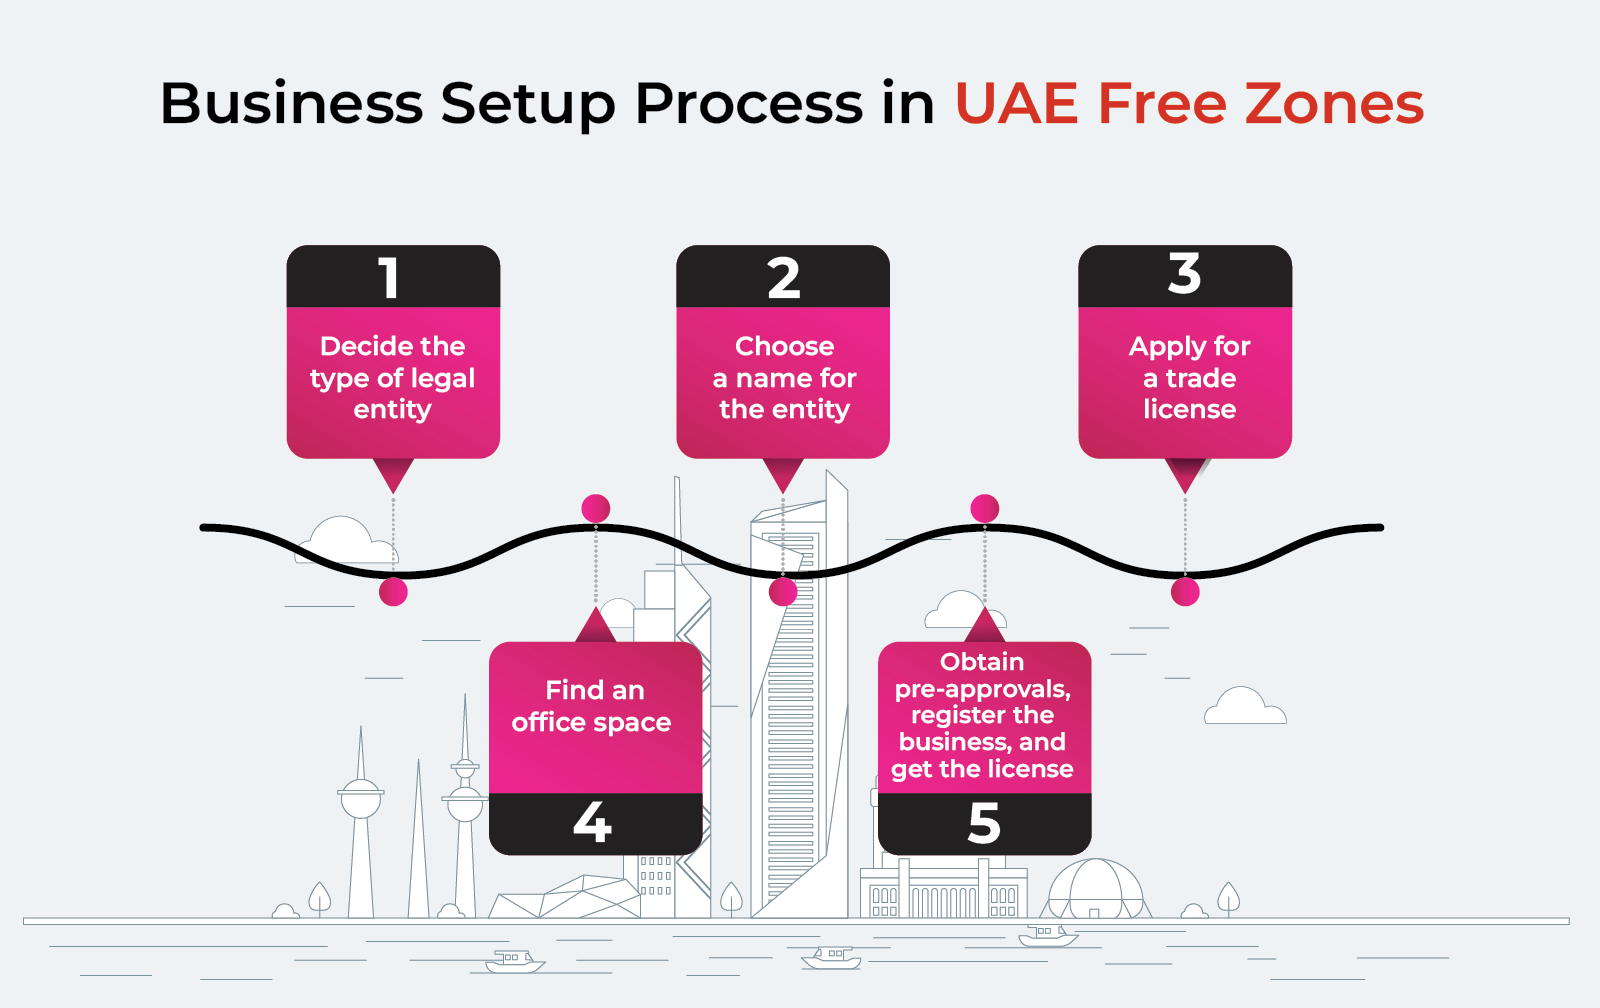 steps included in starting a business in UAE Free Zones